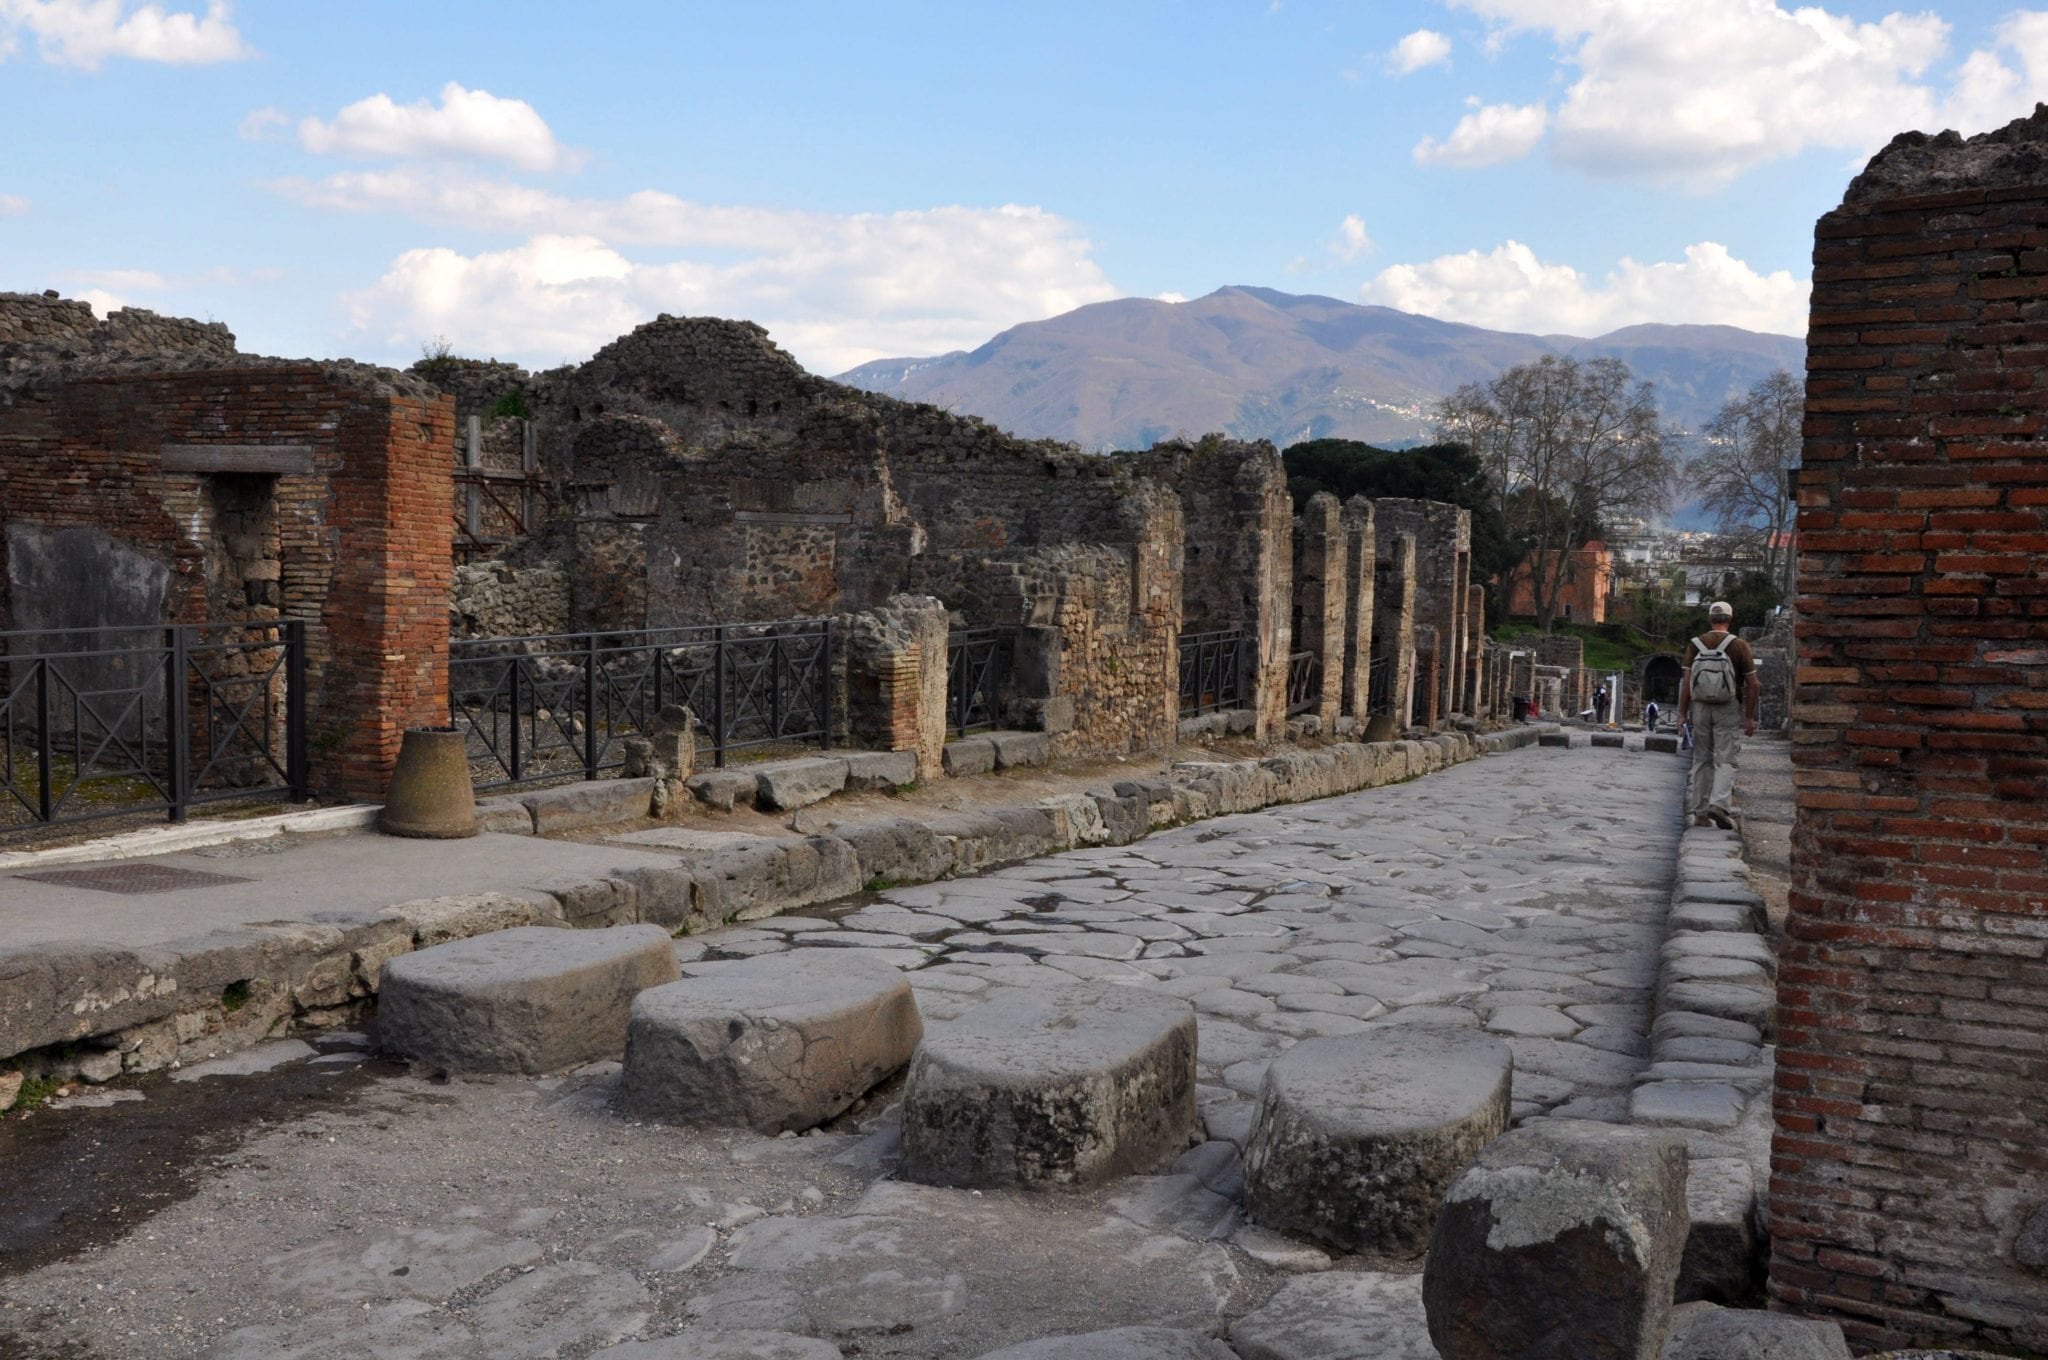 In the shoulder season, even Pompeii is uncrowded